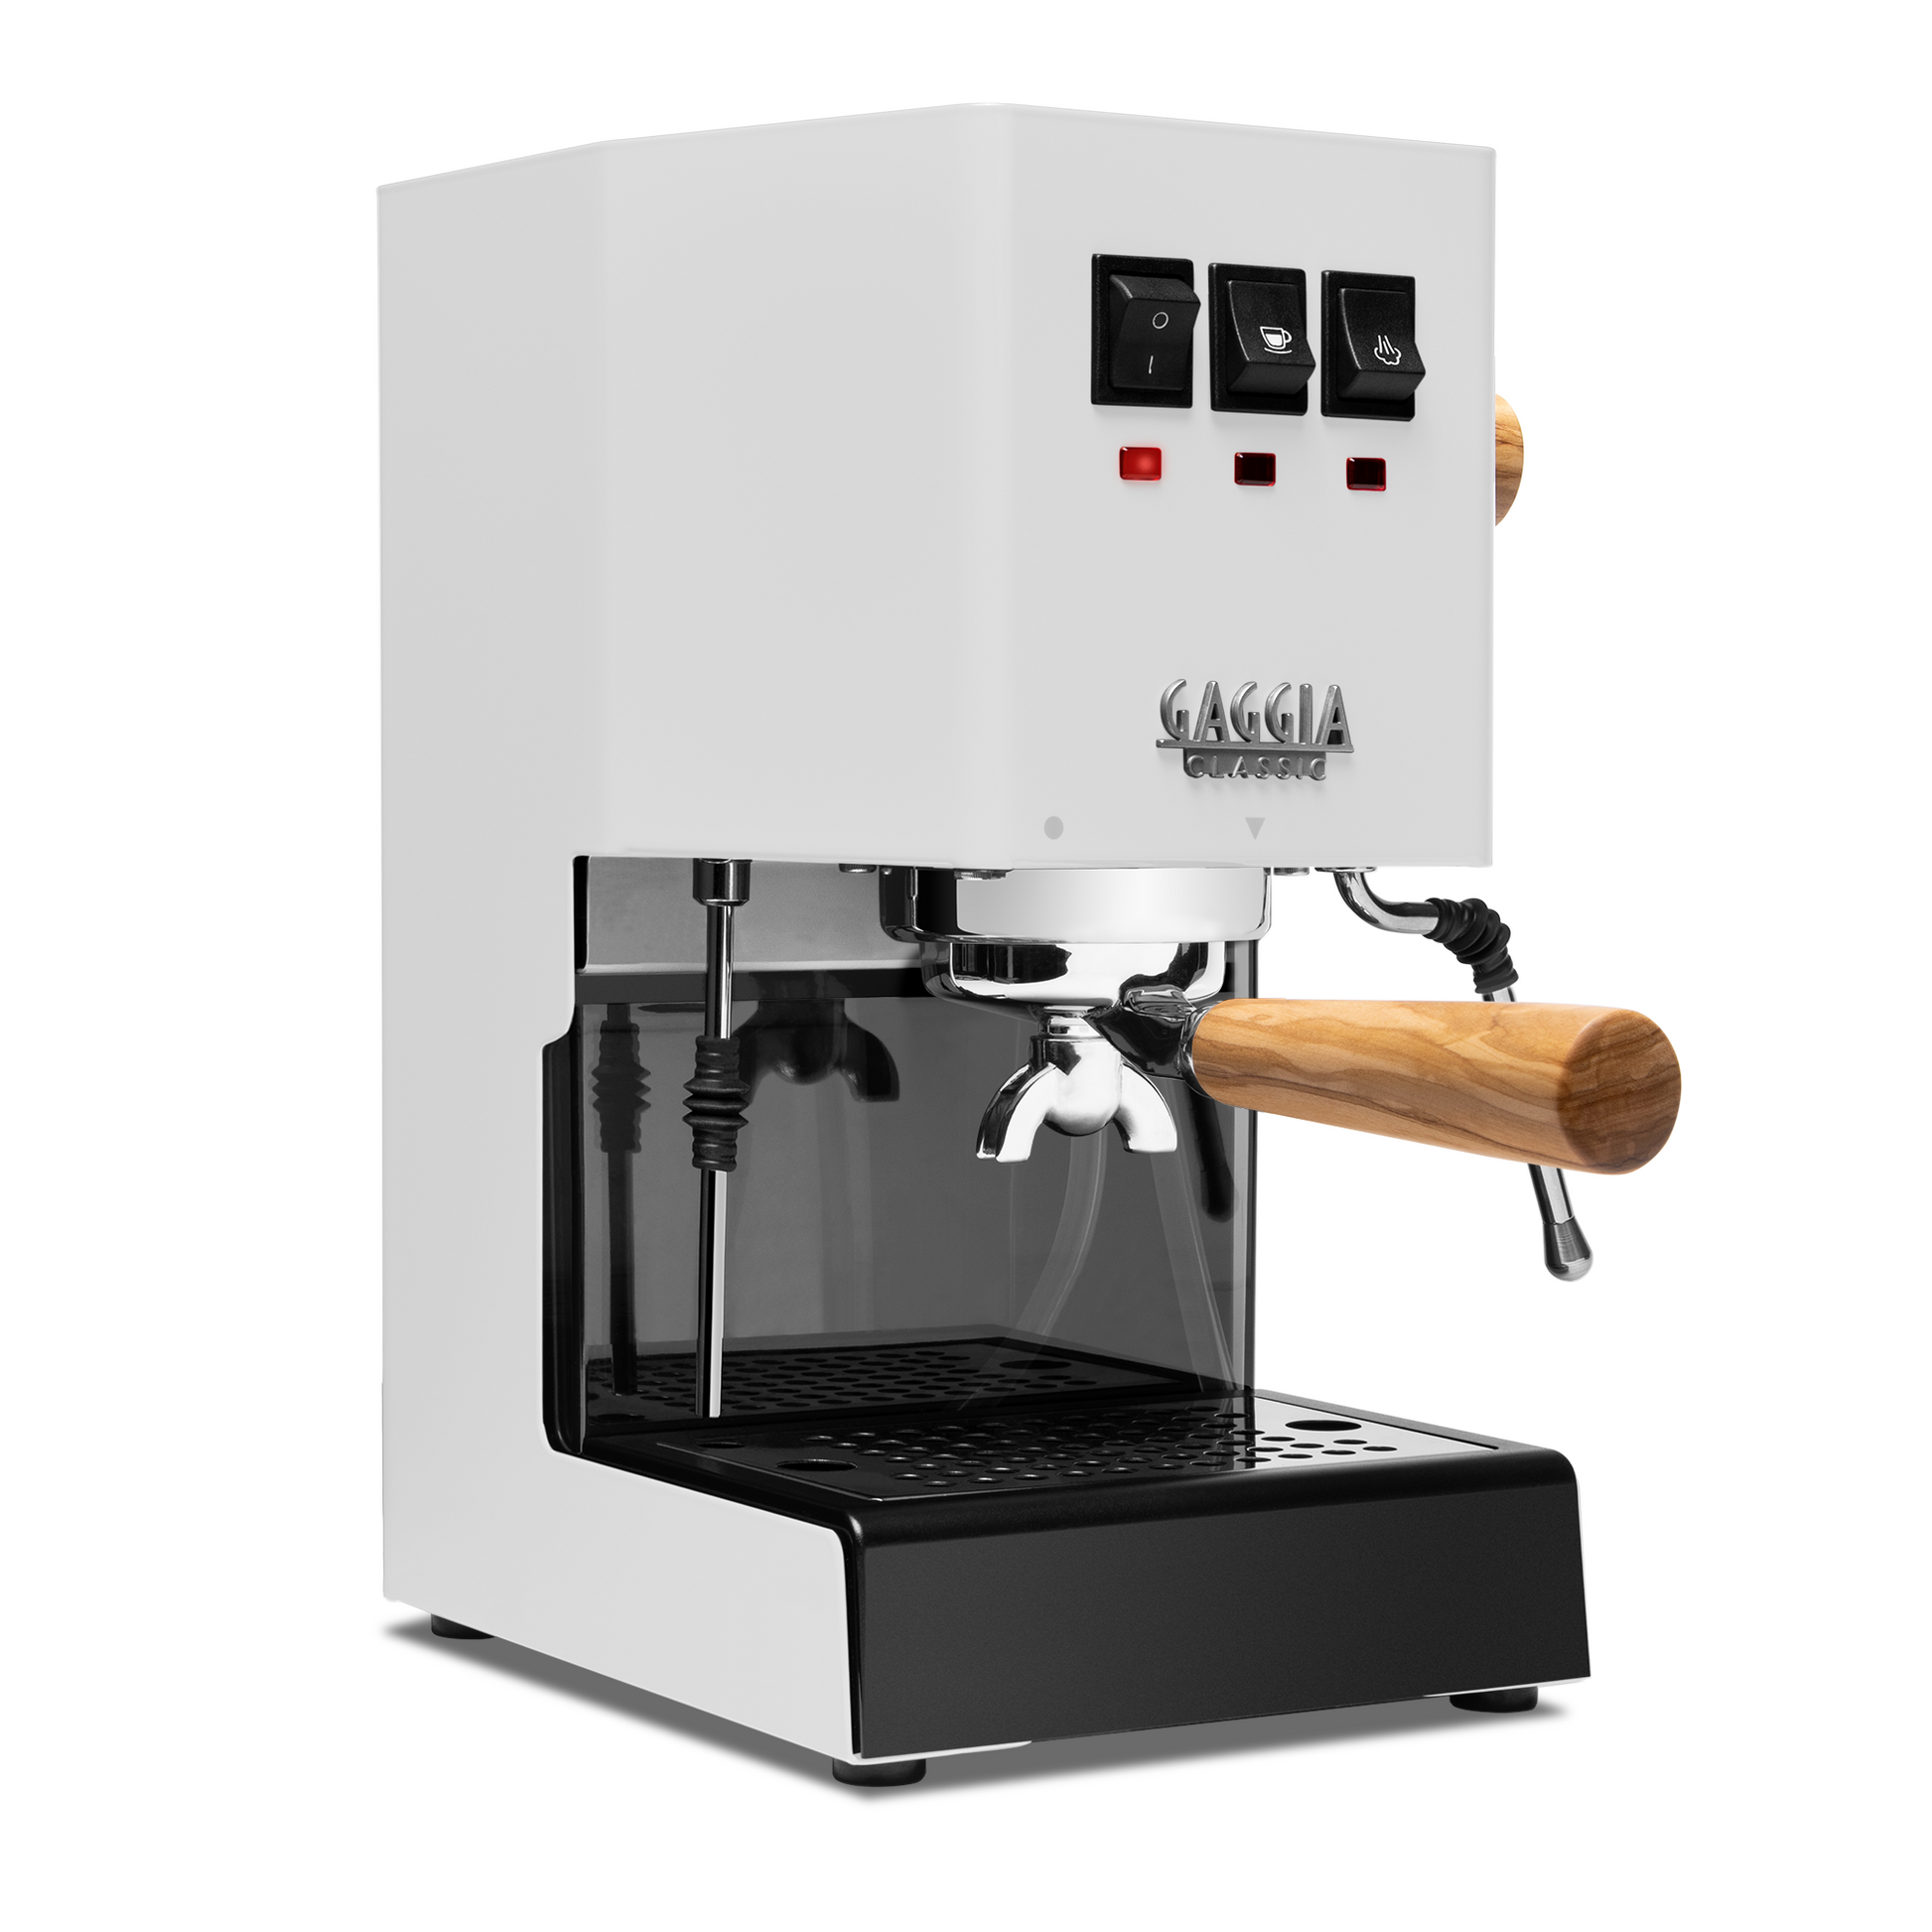 im shopping for my first espresso machine for my apartment and saw this mr. coffee  espresso machine at the grocery store. opinions? suggestions? i just want  something that works decent. thank you 